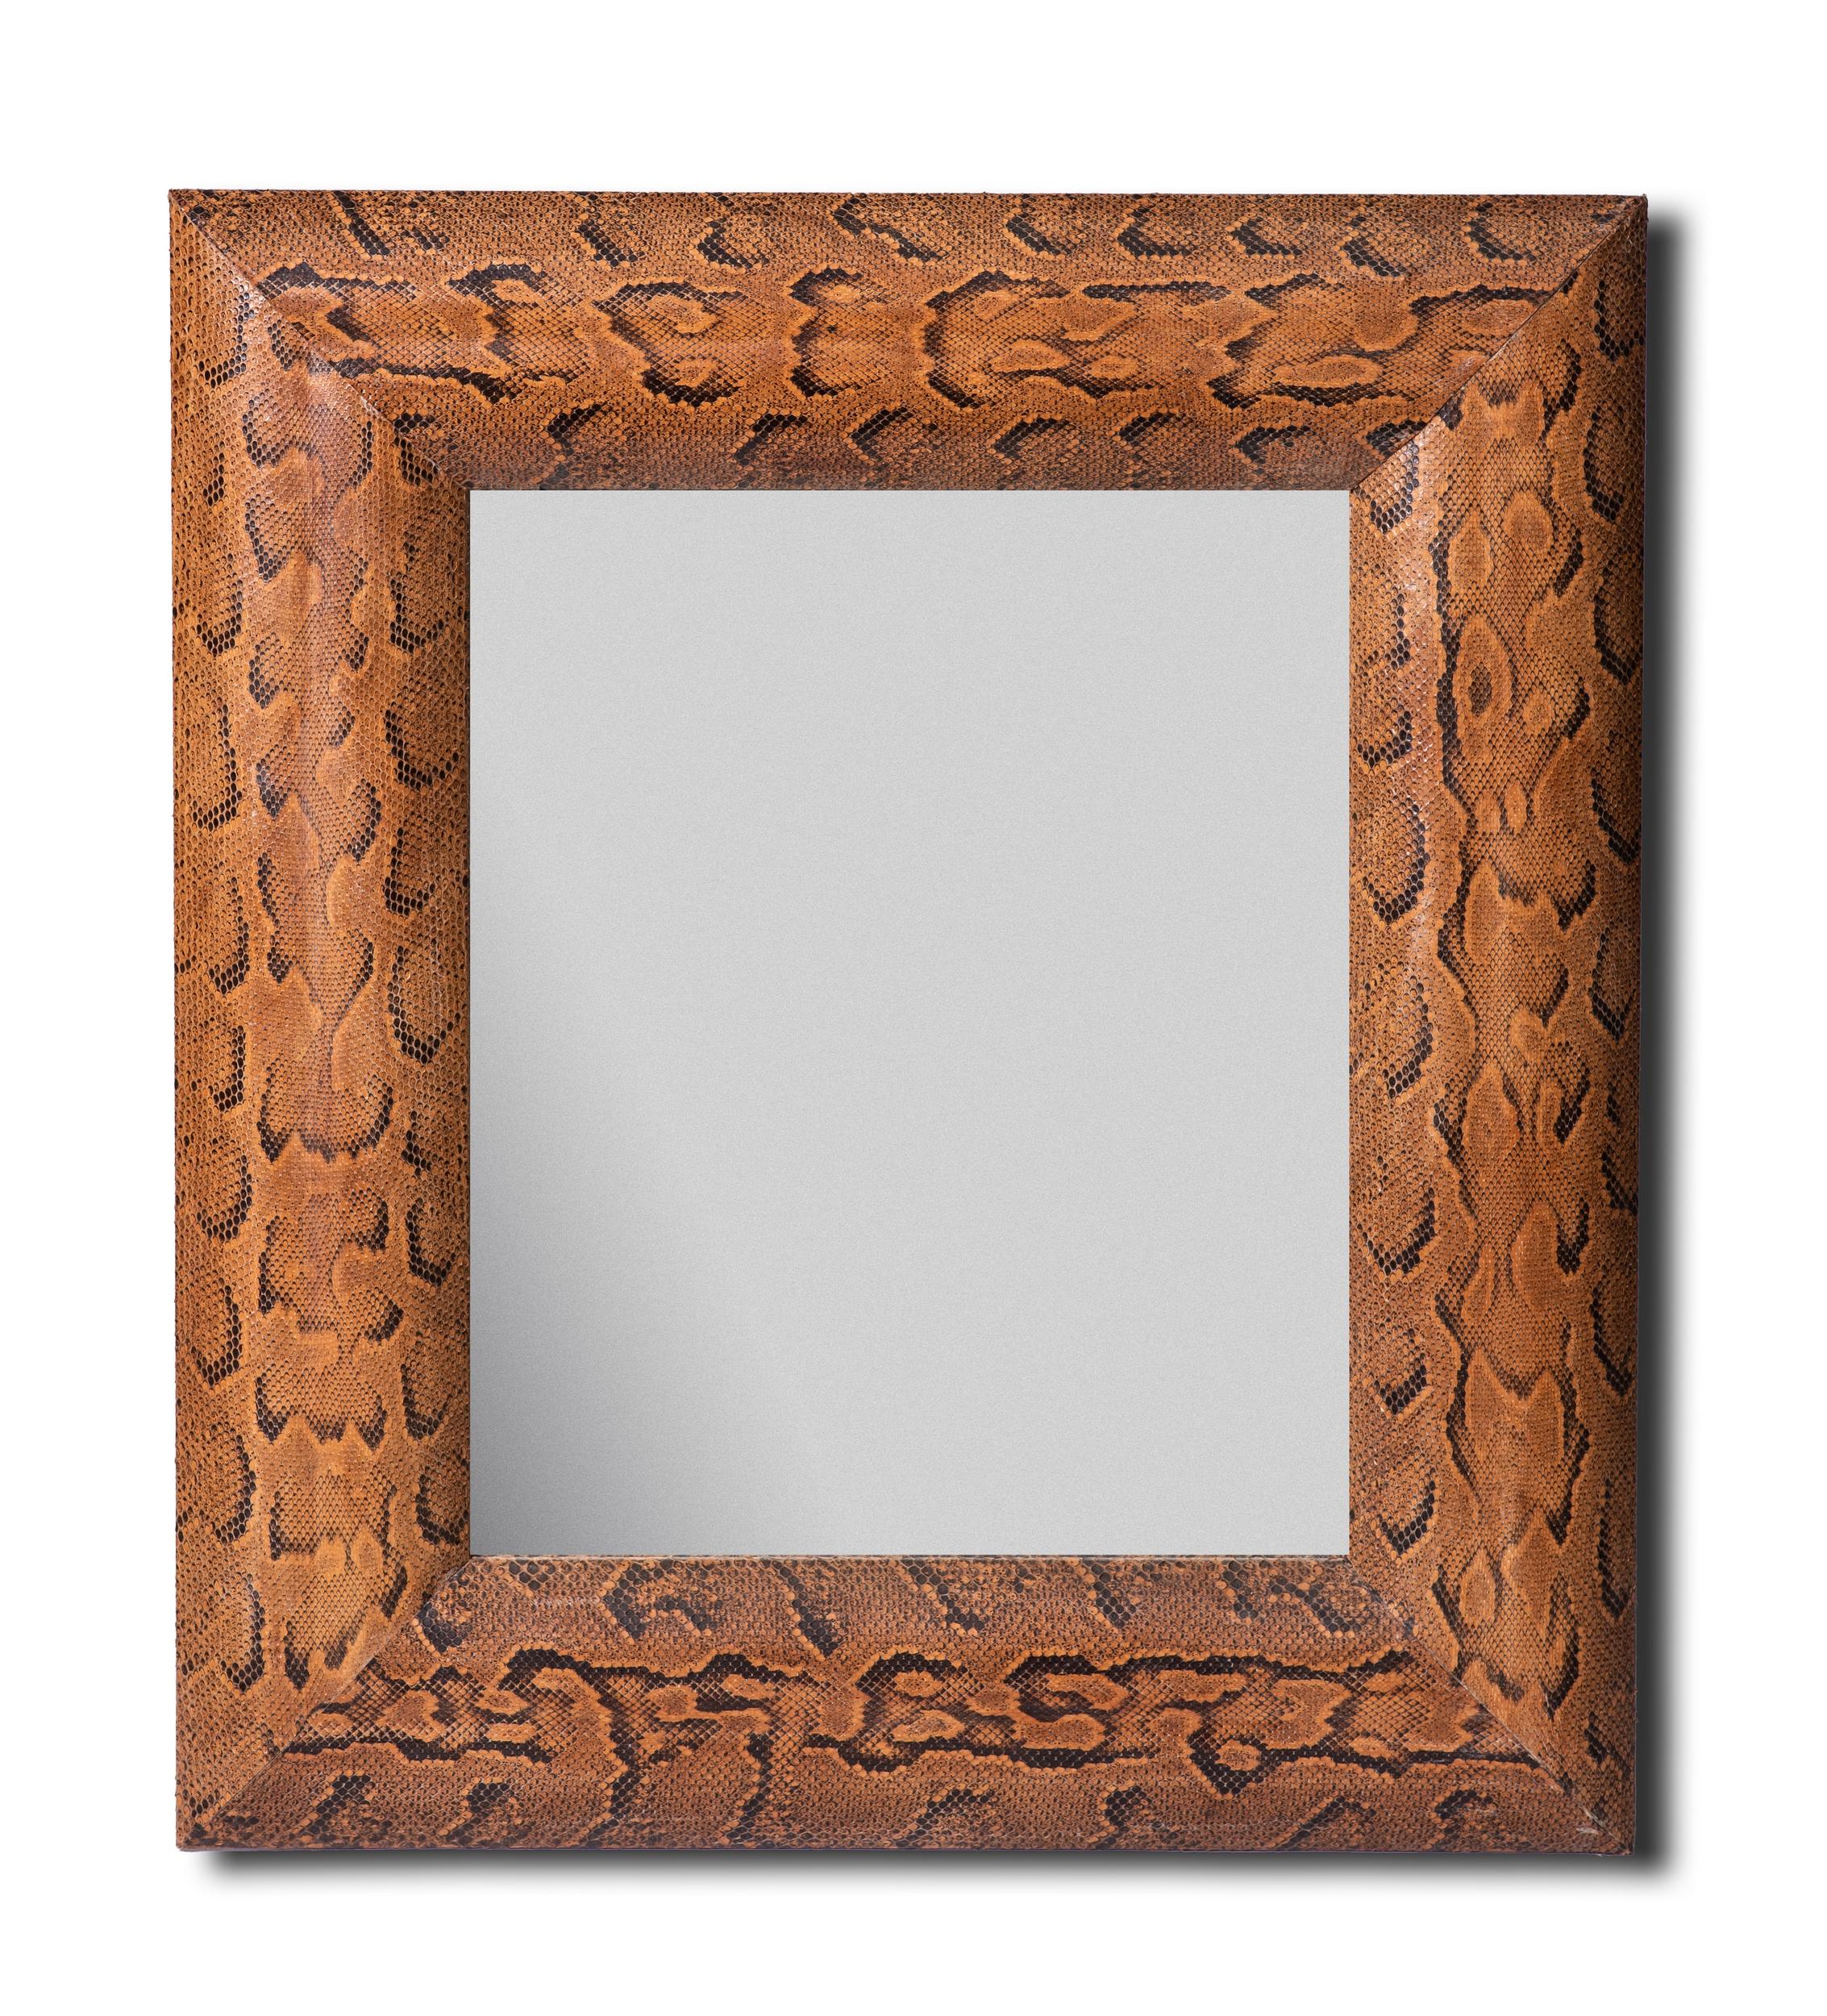 Mirror framed in python skin on a wooden core.